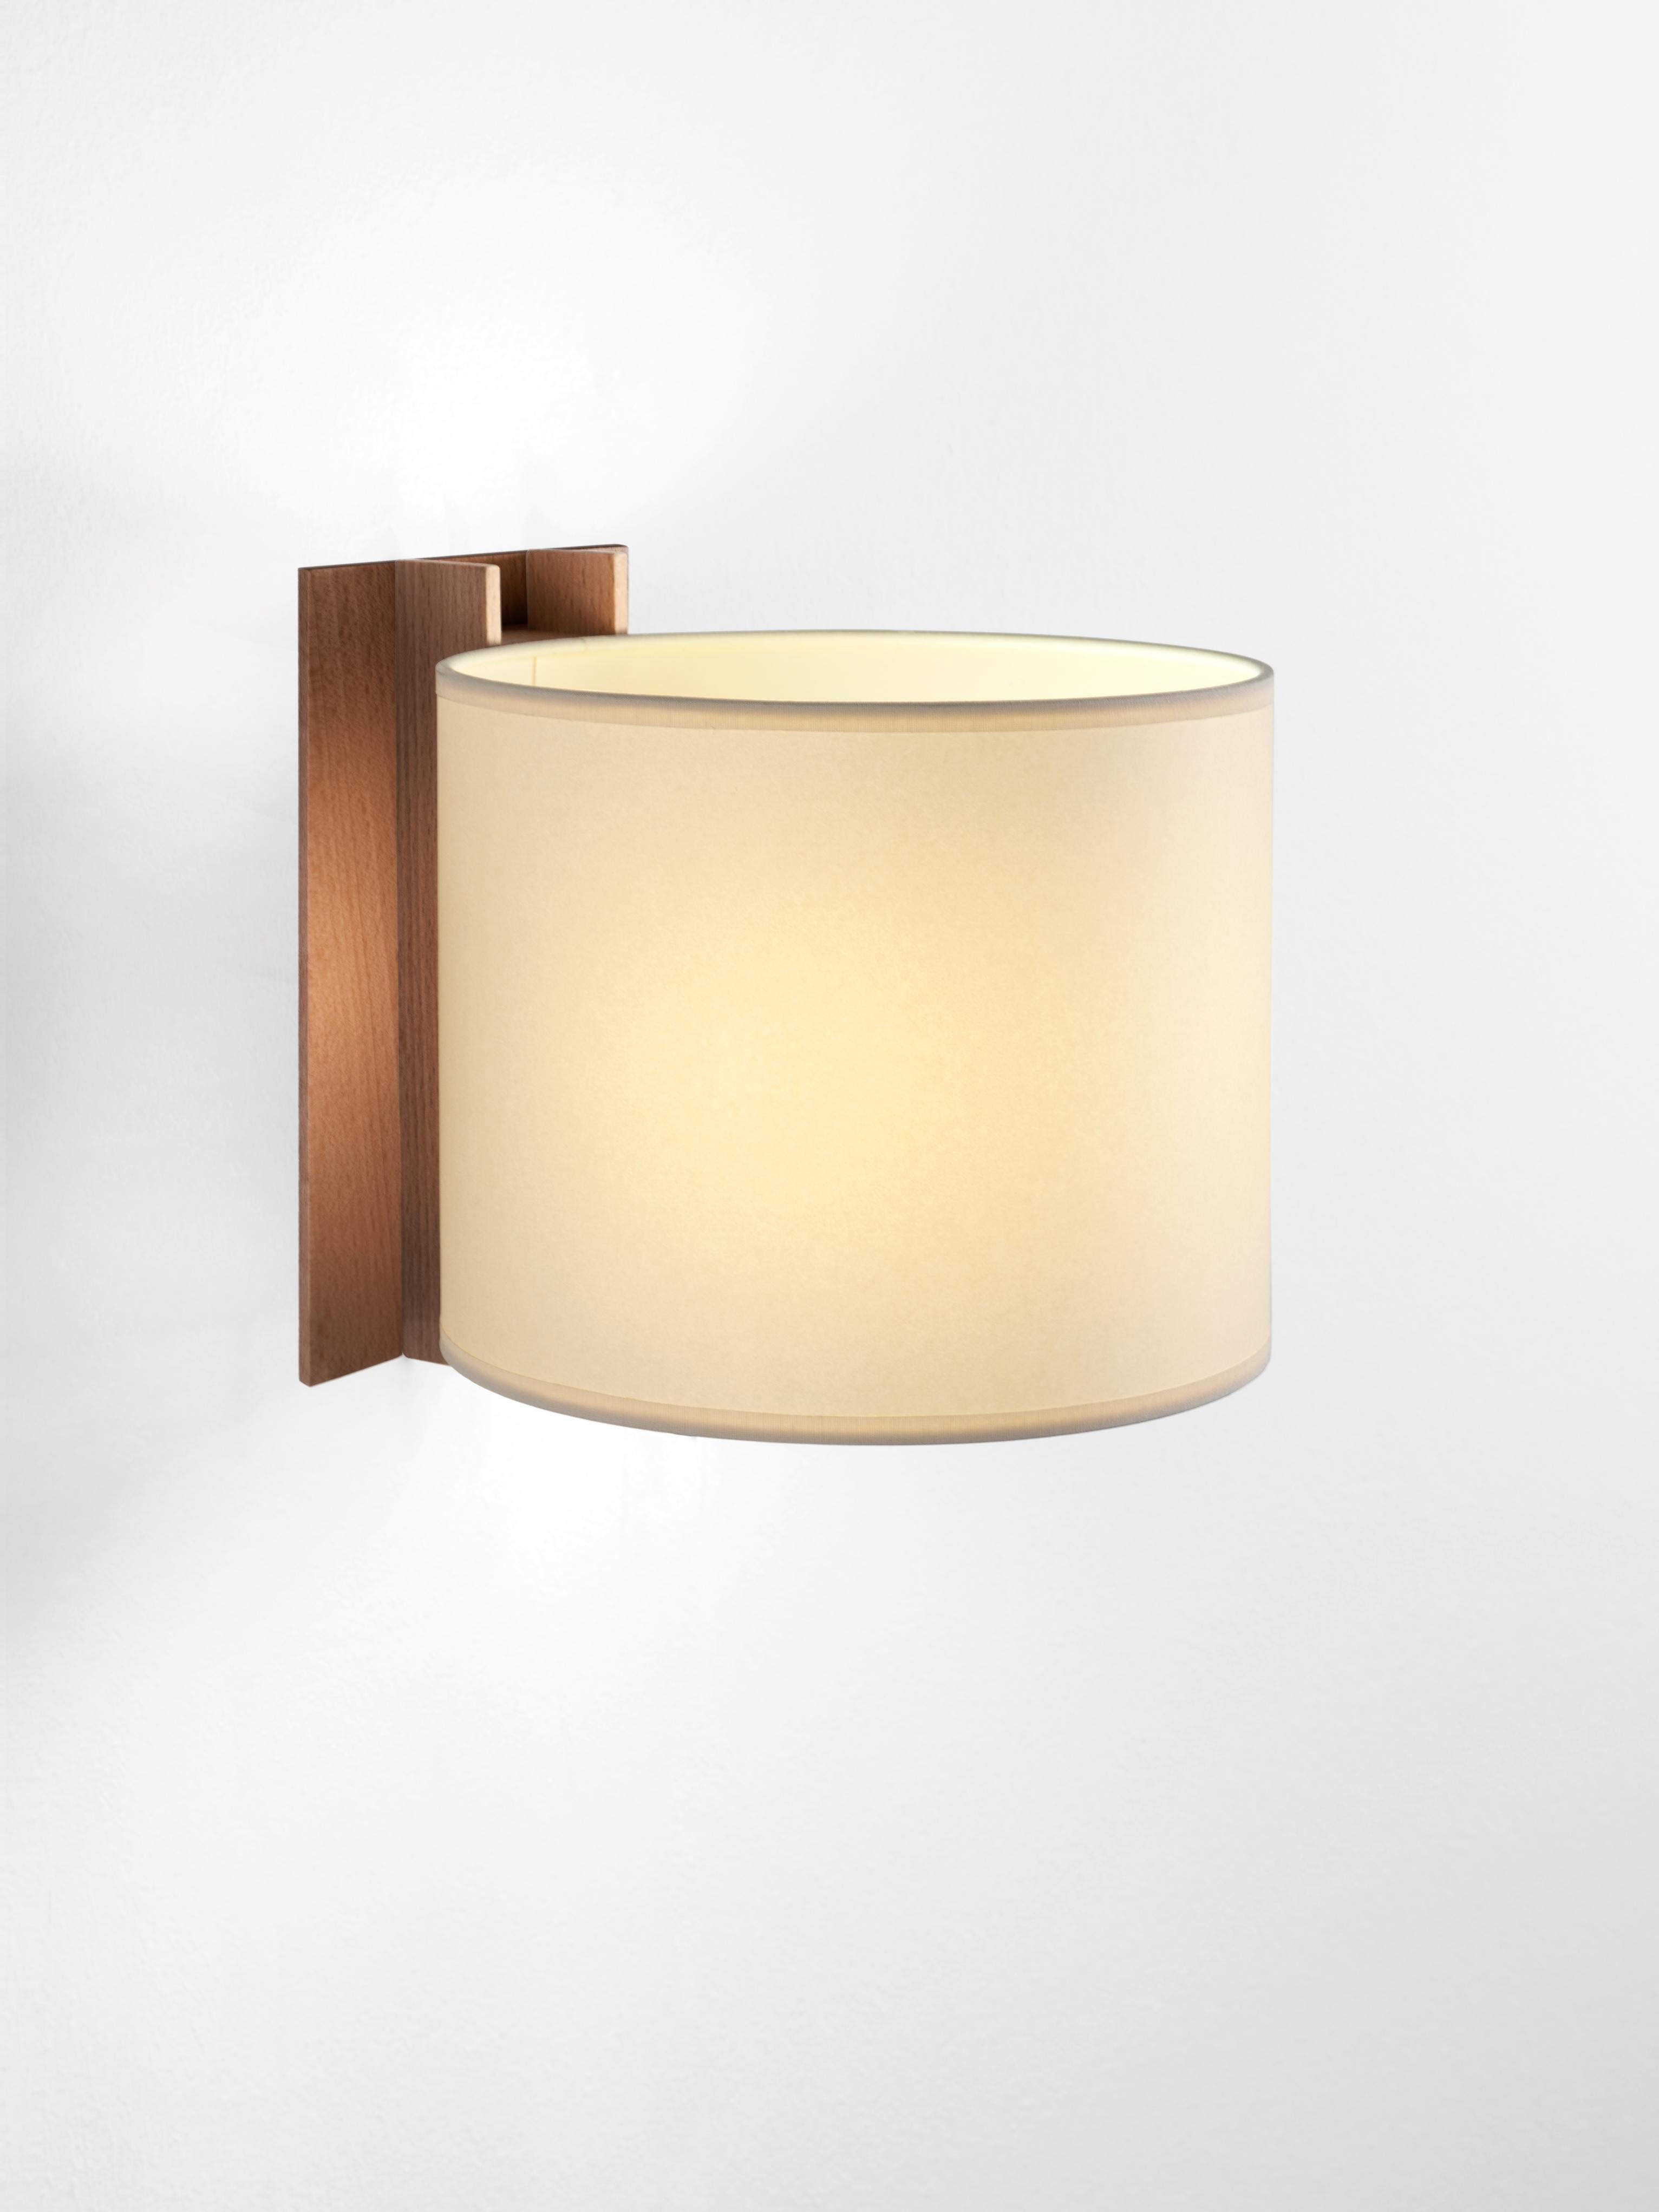 Beige and walnut TMM Corto wall lamp by Miguel Milá.
Dimensions: D 20 x W 23 x H 20 cm.
Materials: Metal, walnut wood, parchment lampshade.
Direct wall.
Available in beech or walnut and in white or beige lampshade.
Available with plug or direct